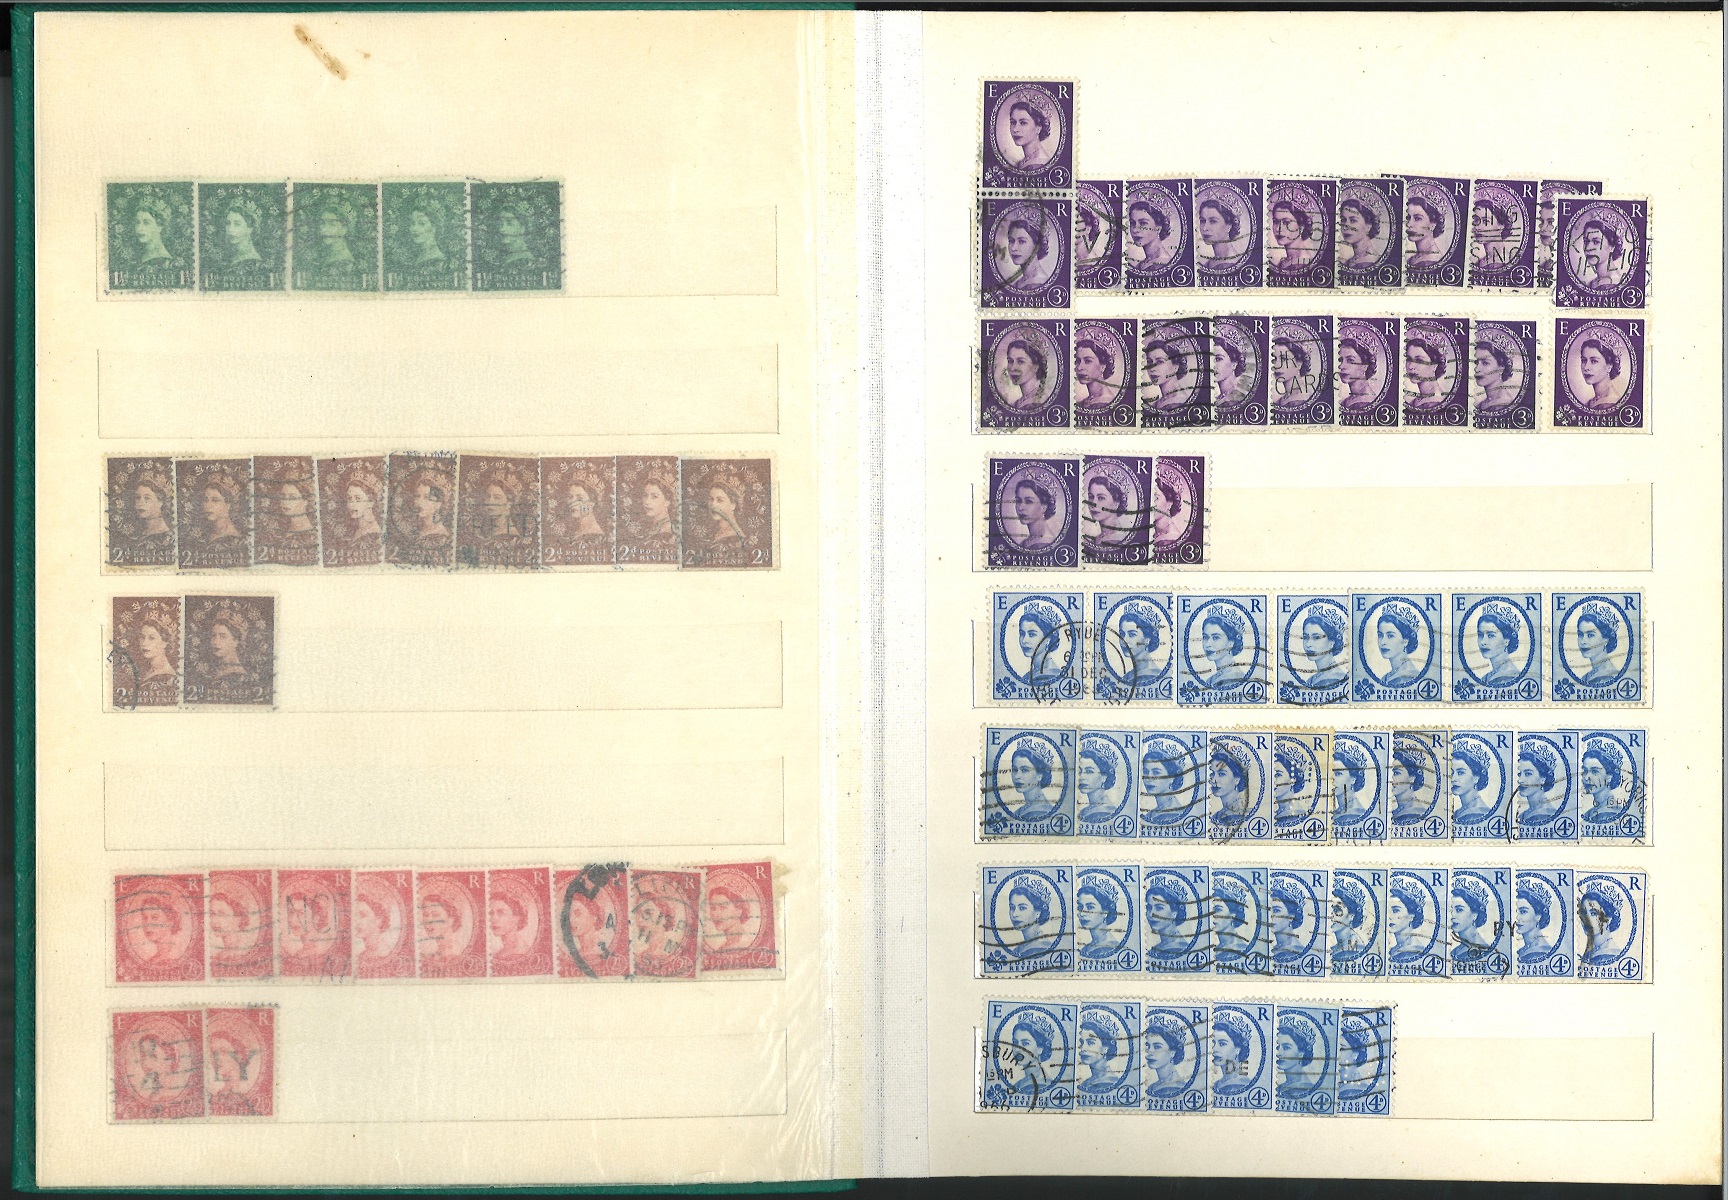 GB stamp collection in stockbook. Some duplication. Includes QEII defs 1950's, QEII high value